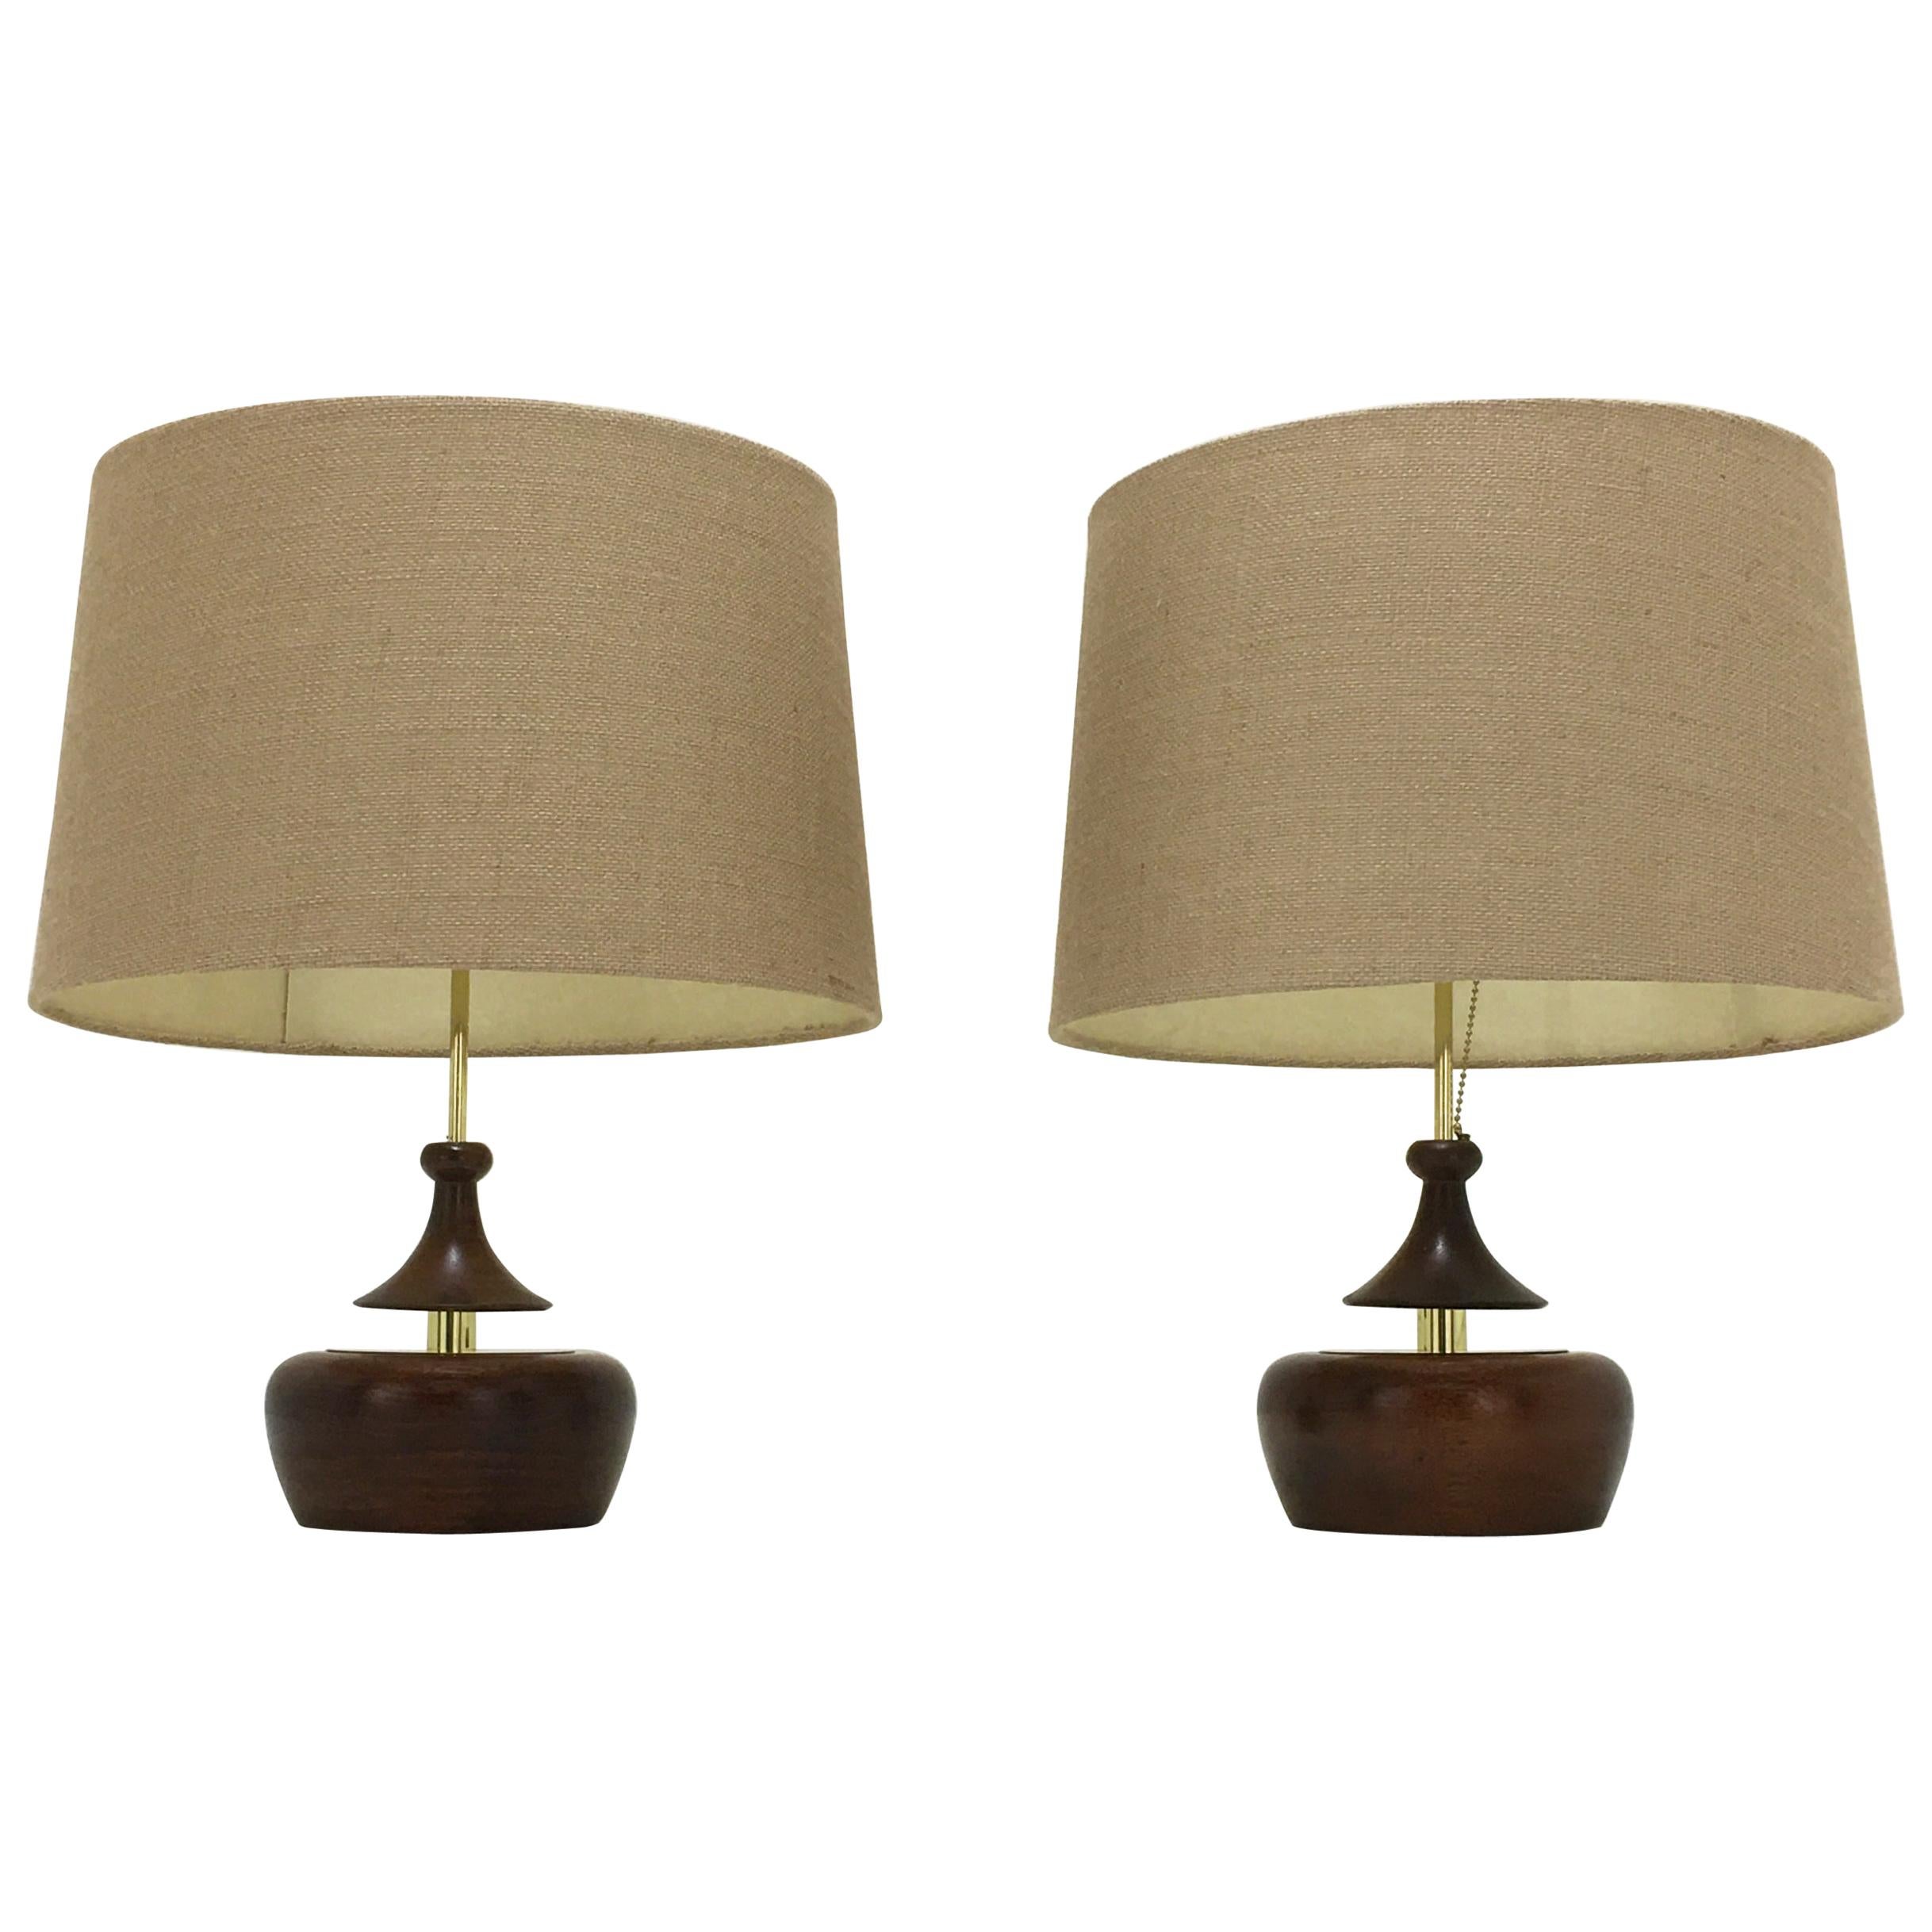 Pair of Table Lamps by Modeline of California